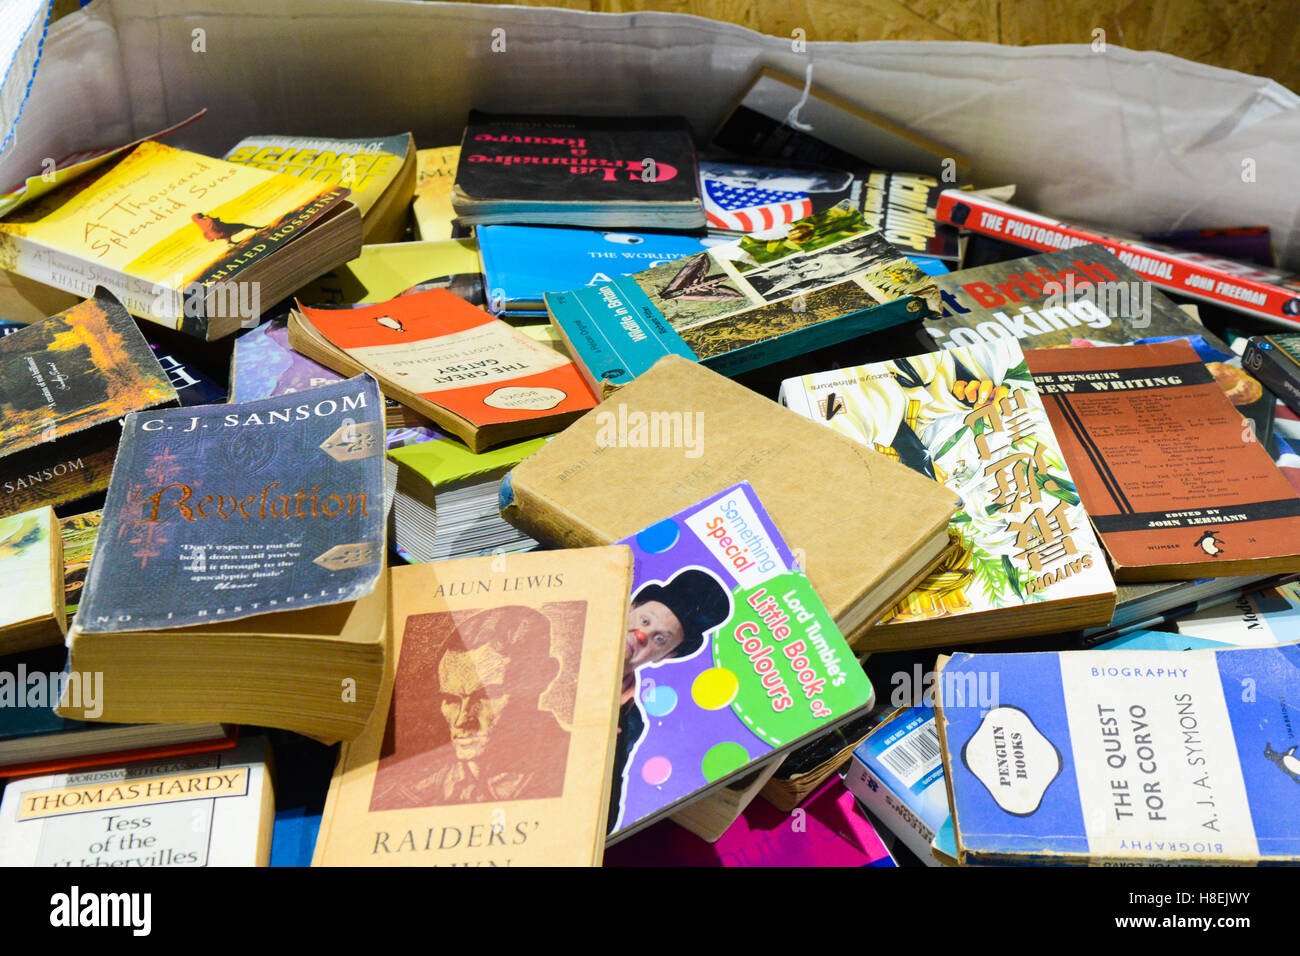 A pile of old novels and books with look to have been read. The books are piled on top of each other. Stock Photo